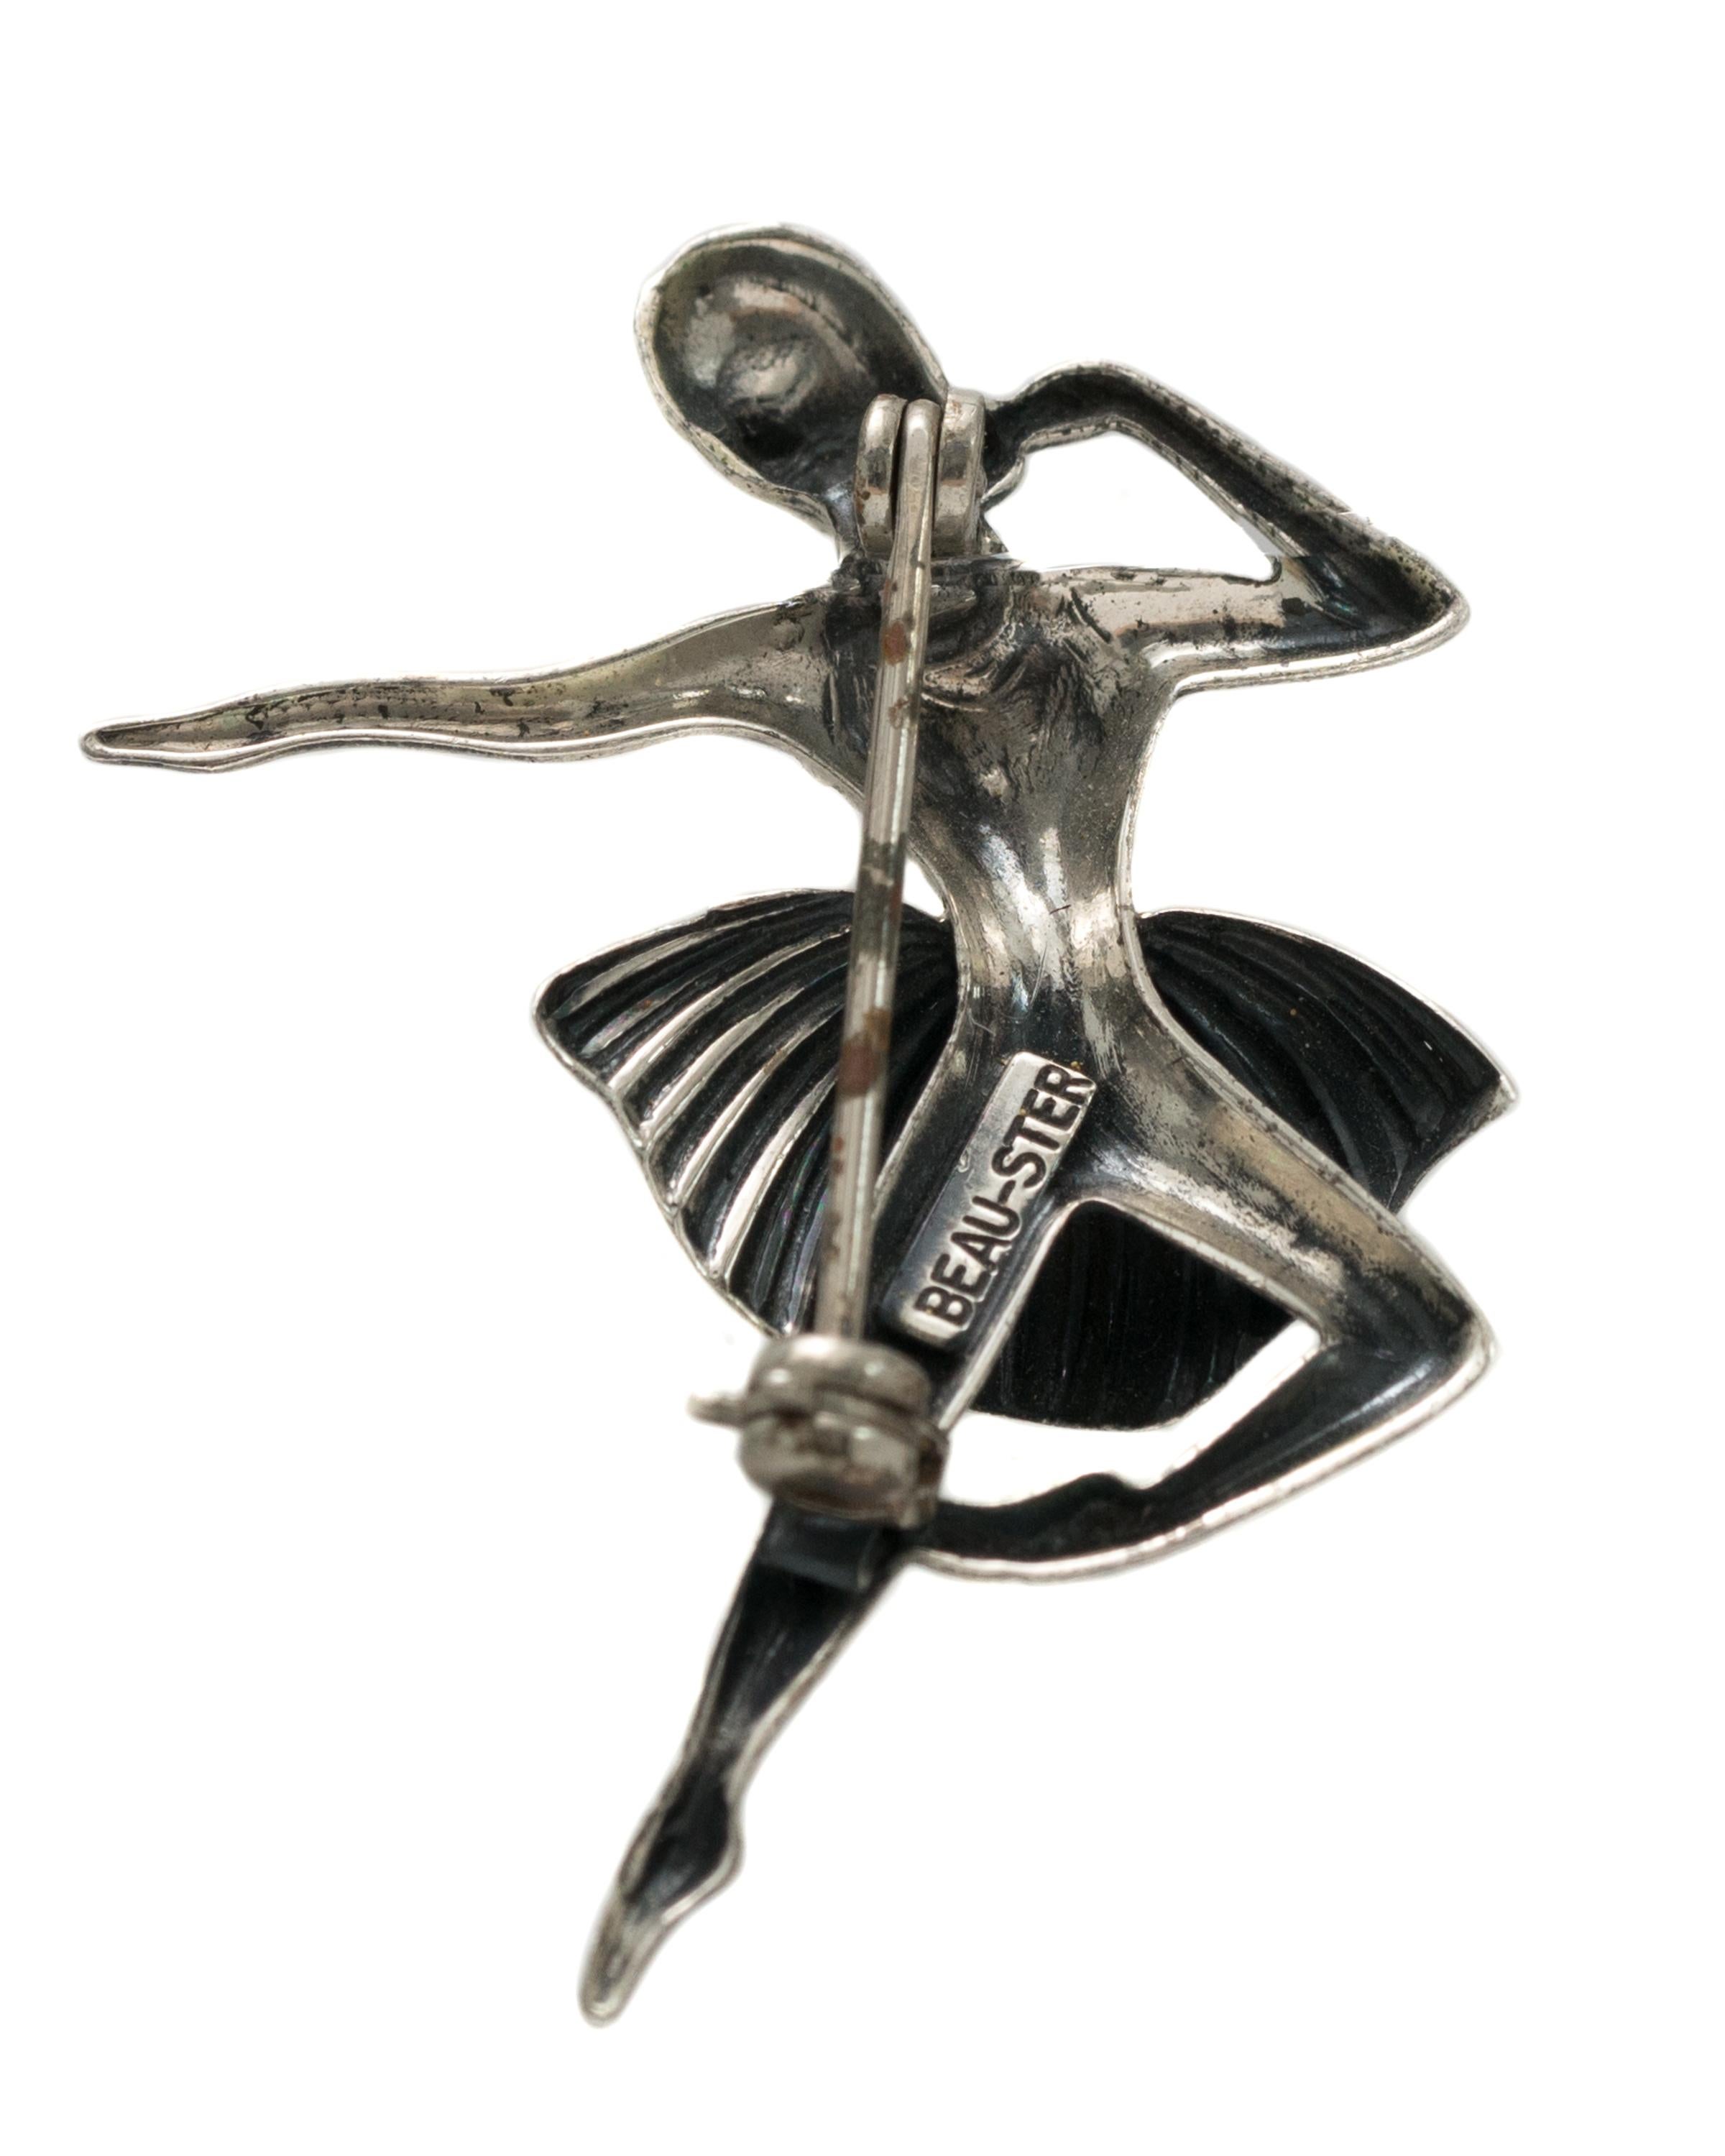 Rare, Collectible 1940s Retro Ballerina Pin - Sterling Silver 

Features:
A tiny dancer wearing pointe shoes and a tutu. The tutu is textured and curved creating the illusion of movement. 
The brooch has graceful lines, is lightweight and has a